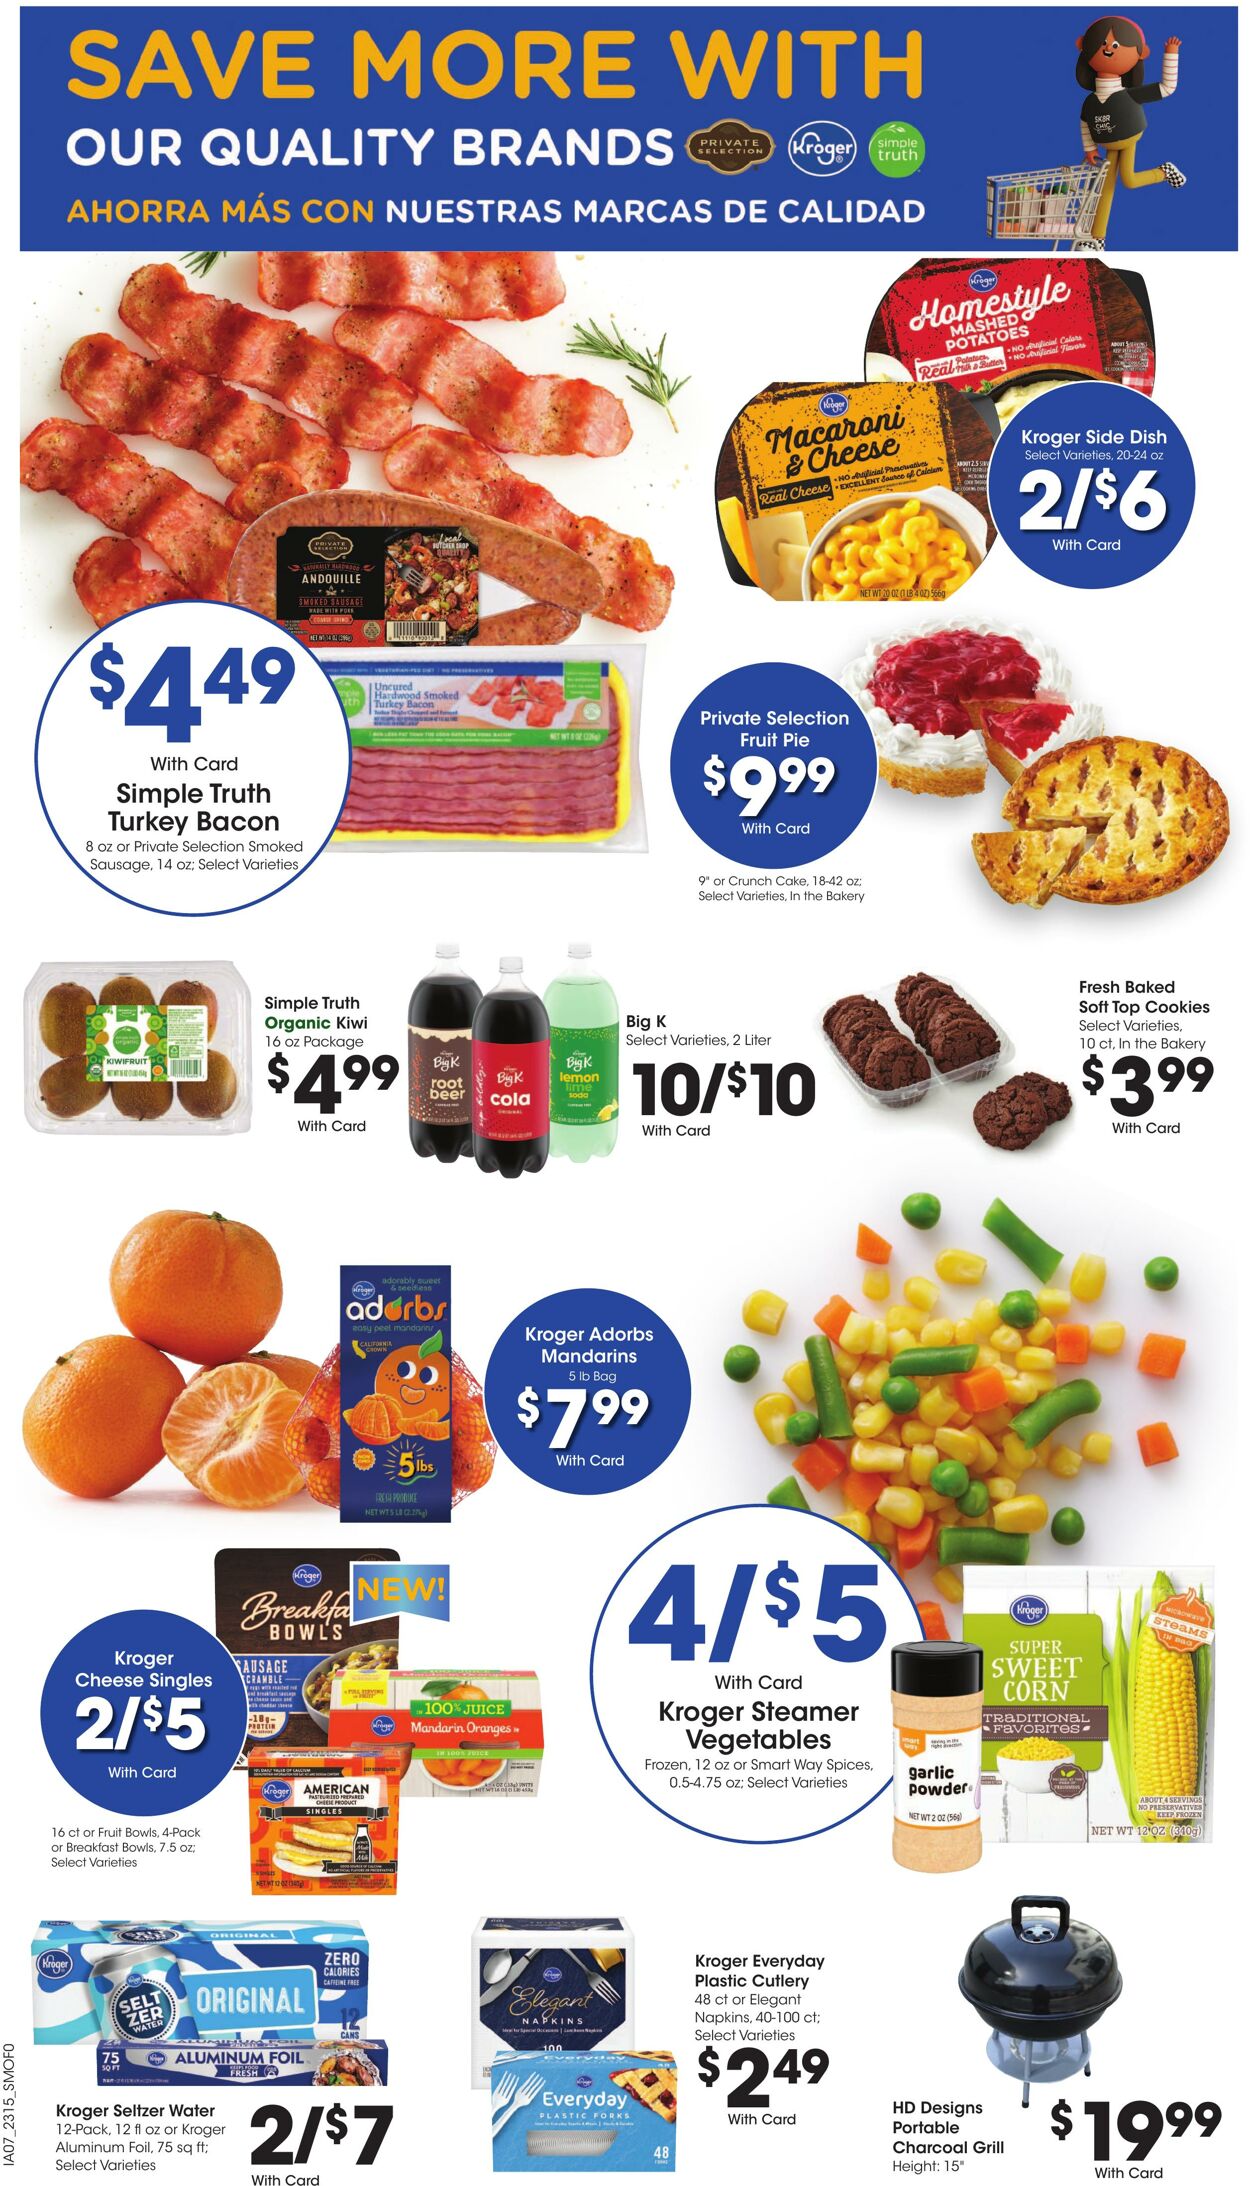 Weekly ad Smith’s Food and Drug 05/10/2023 - 05/16/2023